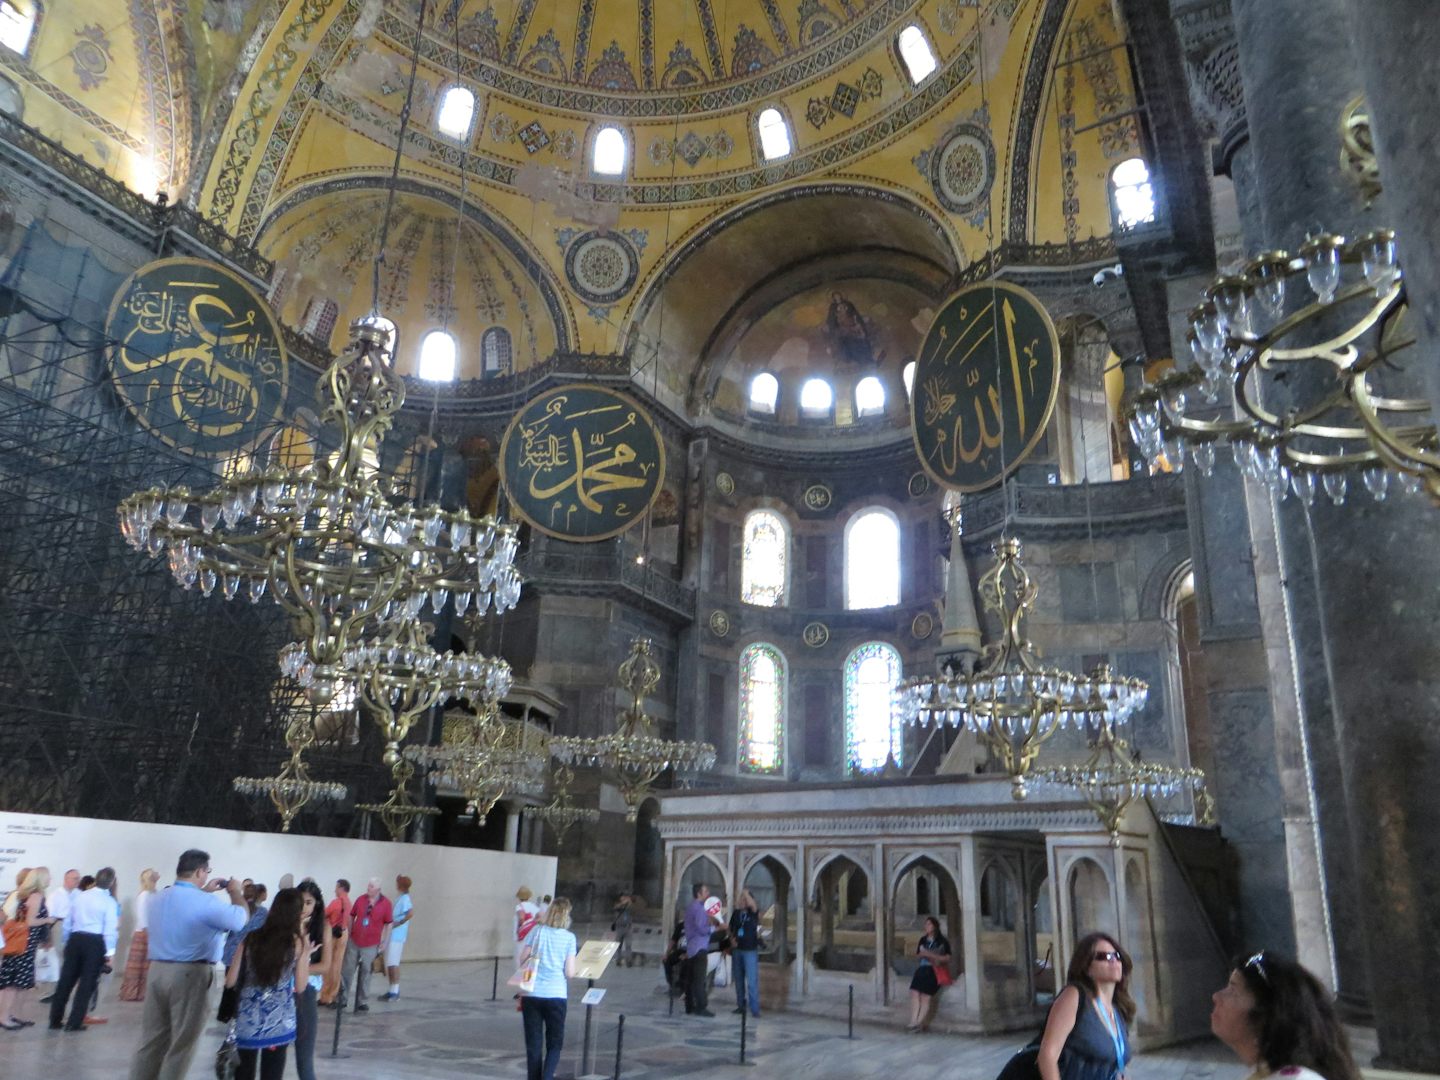 Agia Sophia in Istanbul. Tour with lunch at The Four Seasons was great!